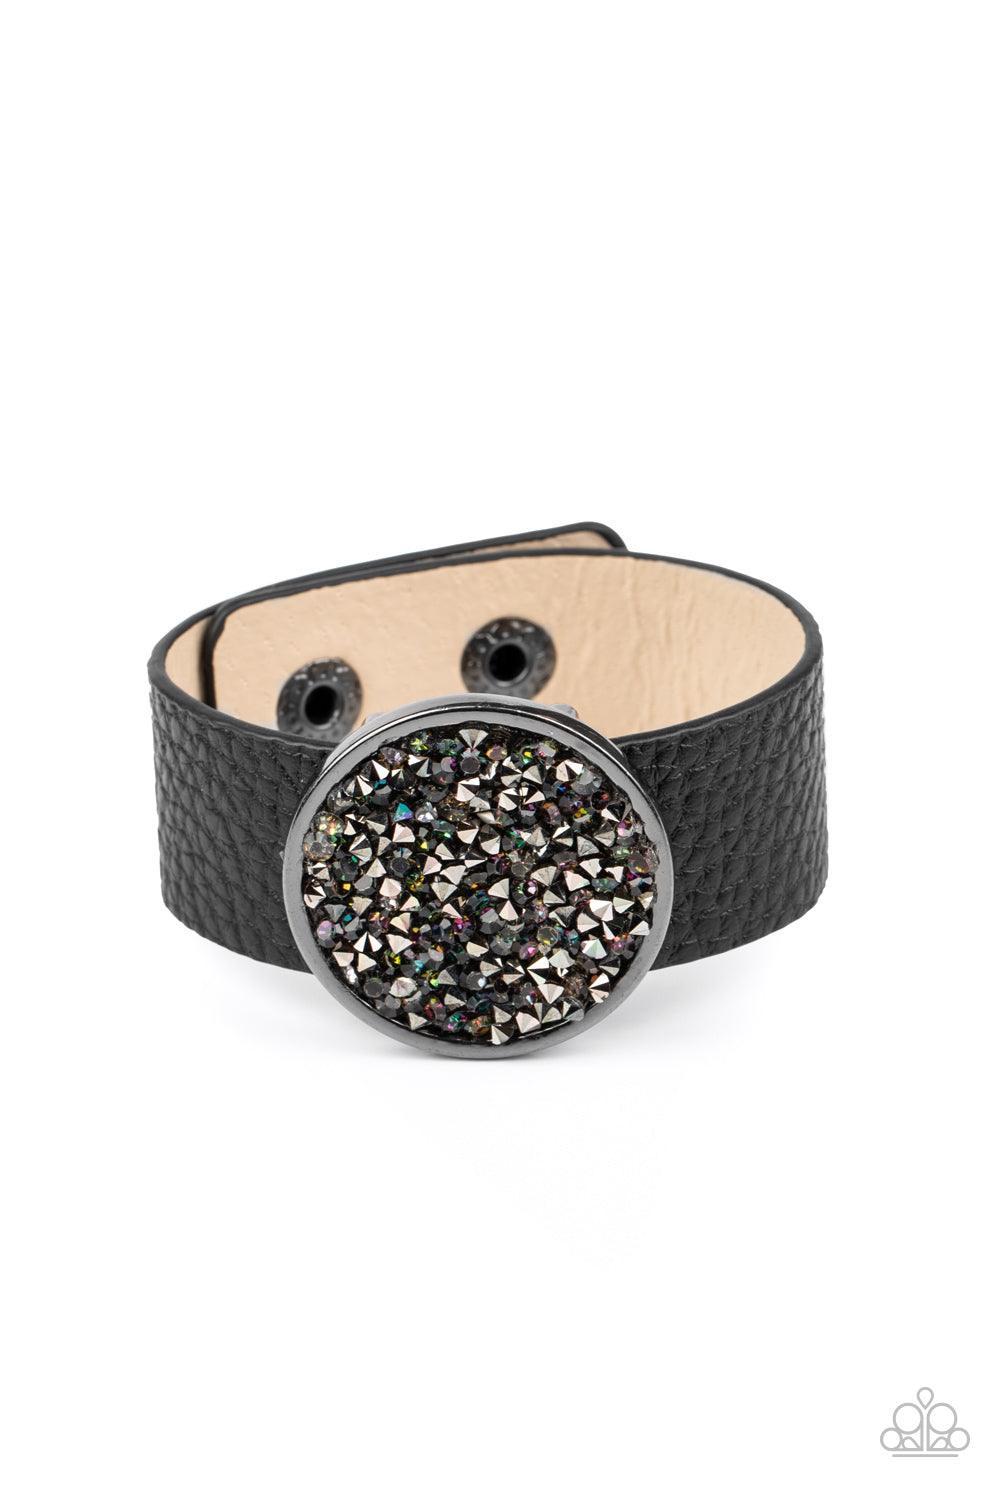 Paparazzi Accessories Stellar Escape - Multi A smoldering display of hematite and oil spill rhinestones scatter across the front of a gunmetal disc that glides along a black leather band for a stellar look. Features an adjustable snap closure. Sold as one